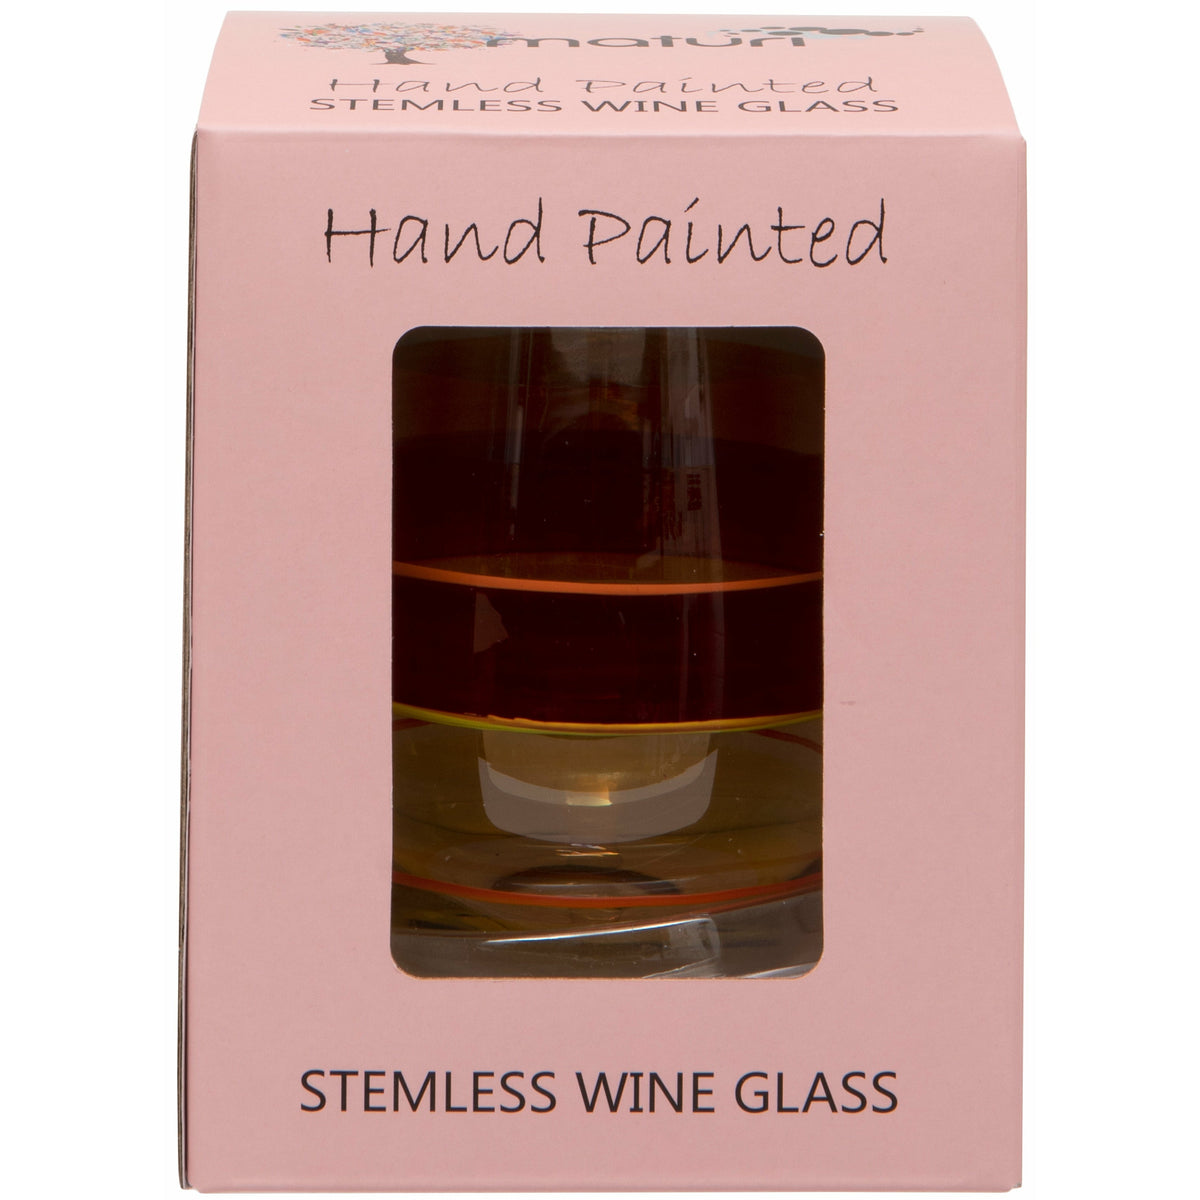 Hand Painted Light Stripe Stemless Wine Glass in Box